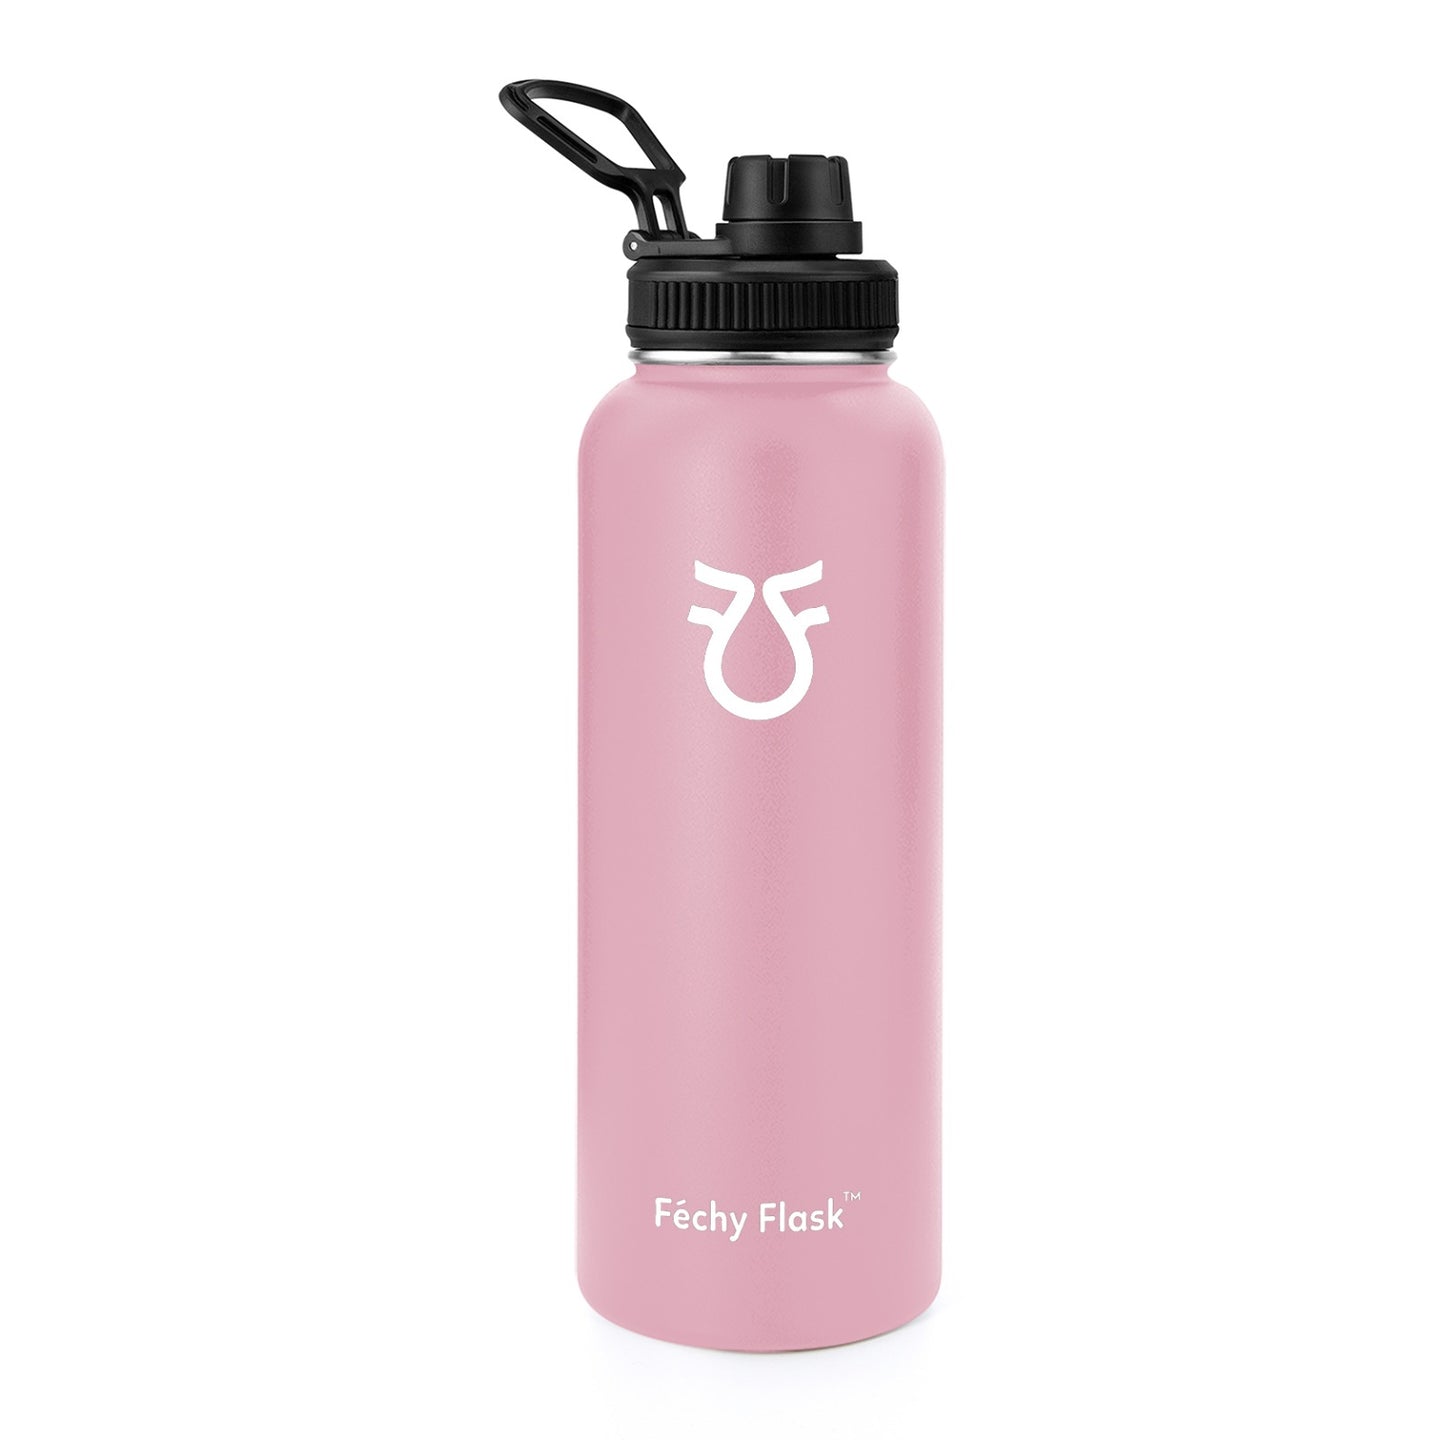 Fechy Stainless Steel insulated Drink Bottle - 1.2L - Pastel